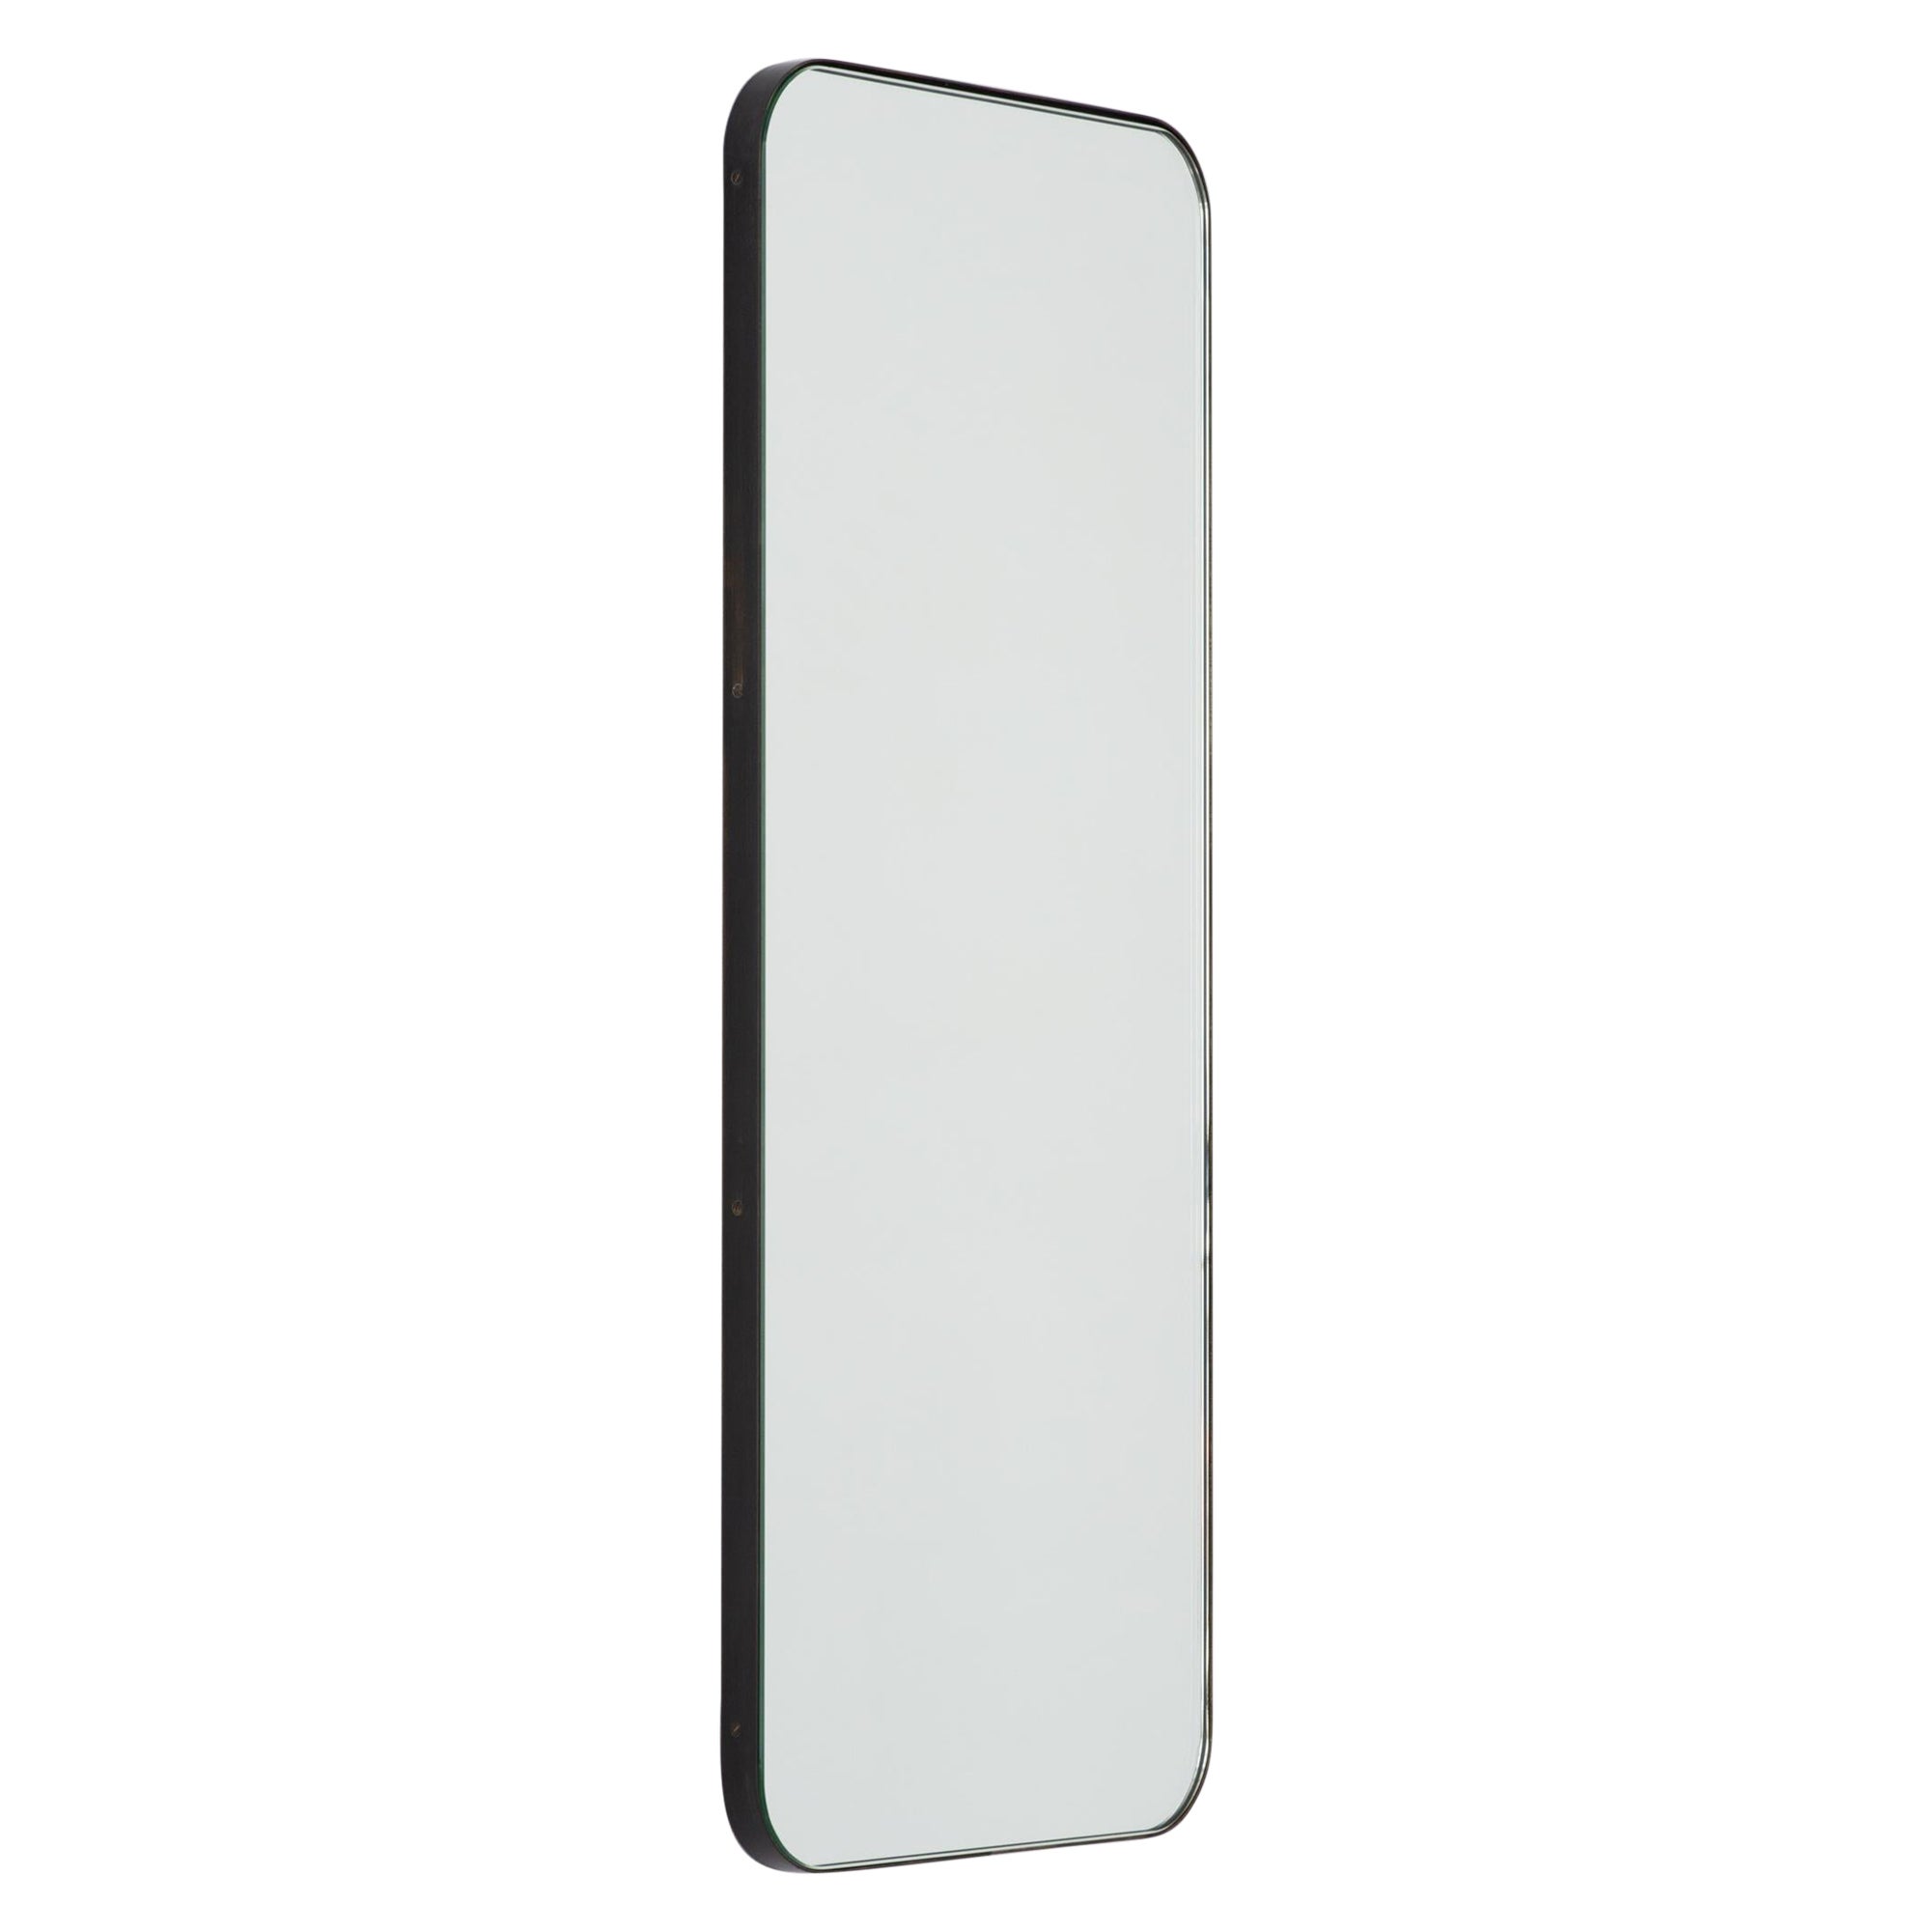 Quadris Rectangular Minimalist Mirror with a Patina Frame, Small For Sale